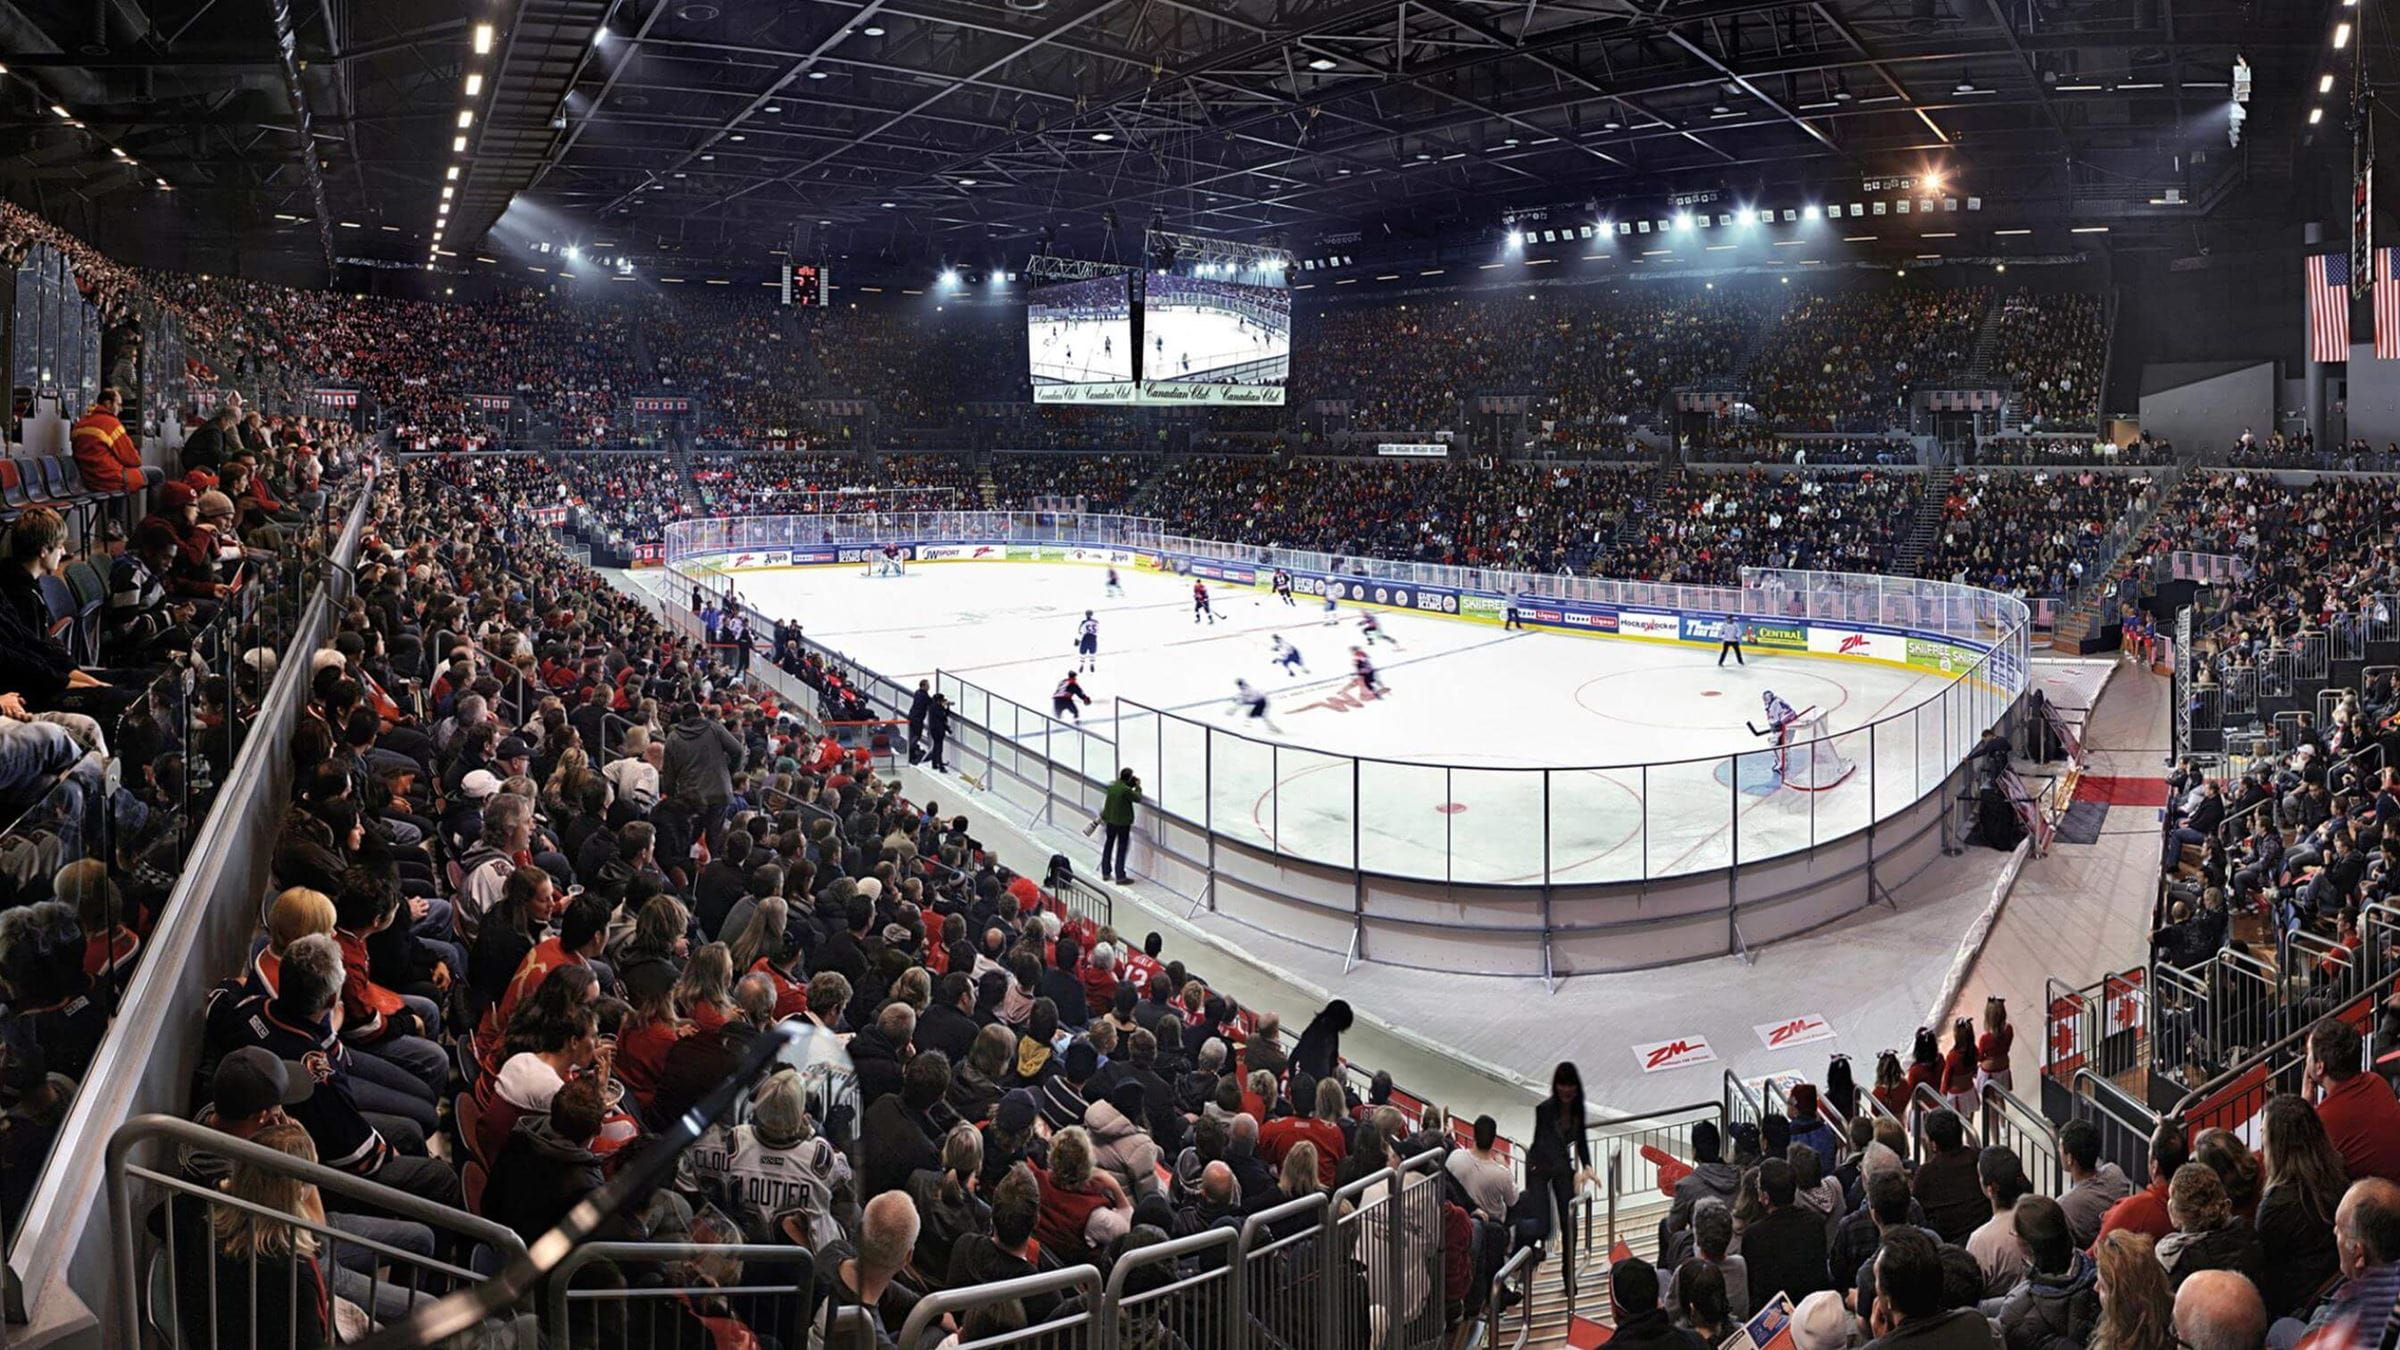 Ice hockey game being played in front of large crowd